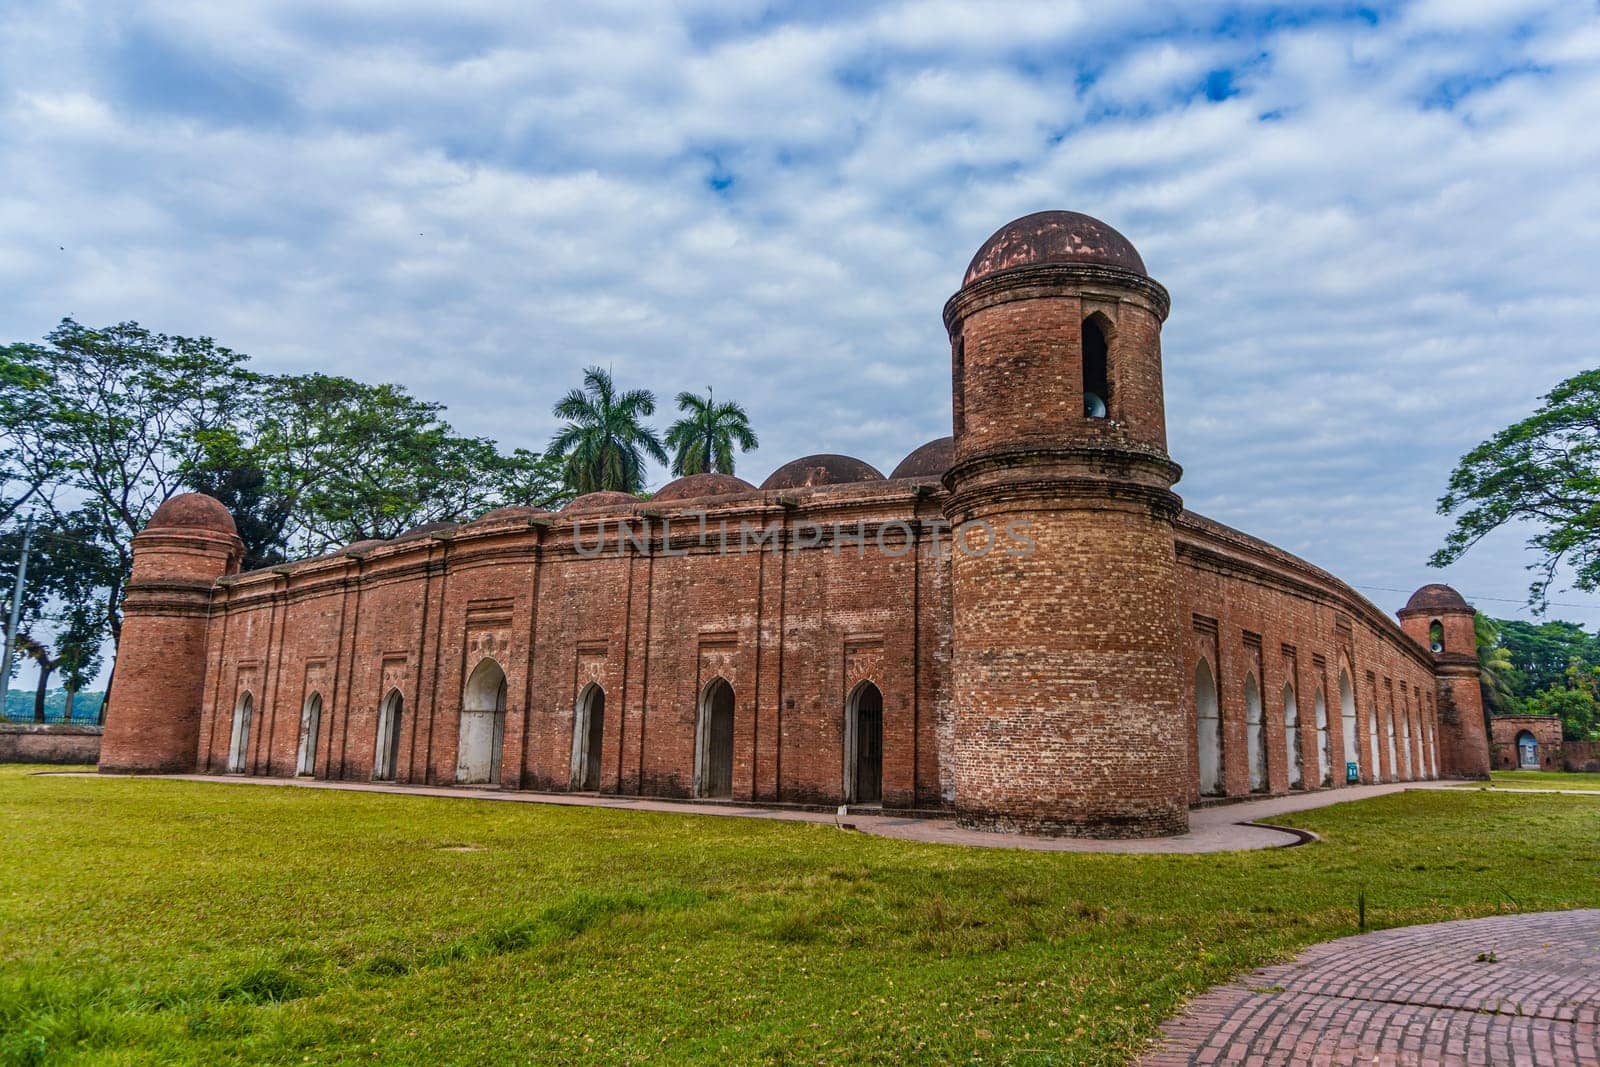 The Sixty Dome Mosque in Bagerhat, Khulna, Bangladesh by abdulkayum97